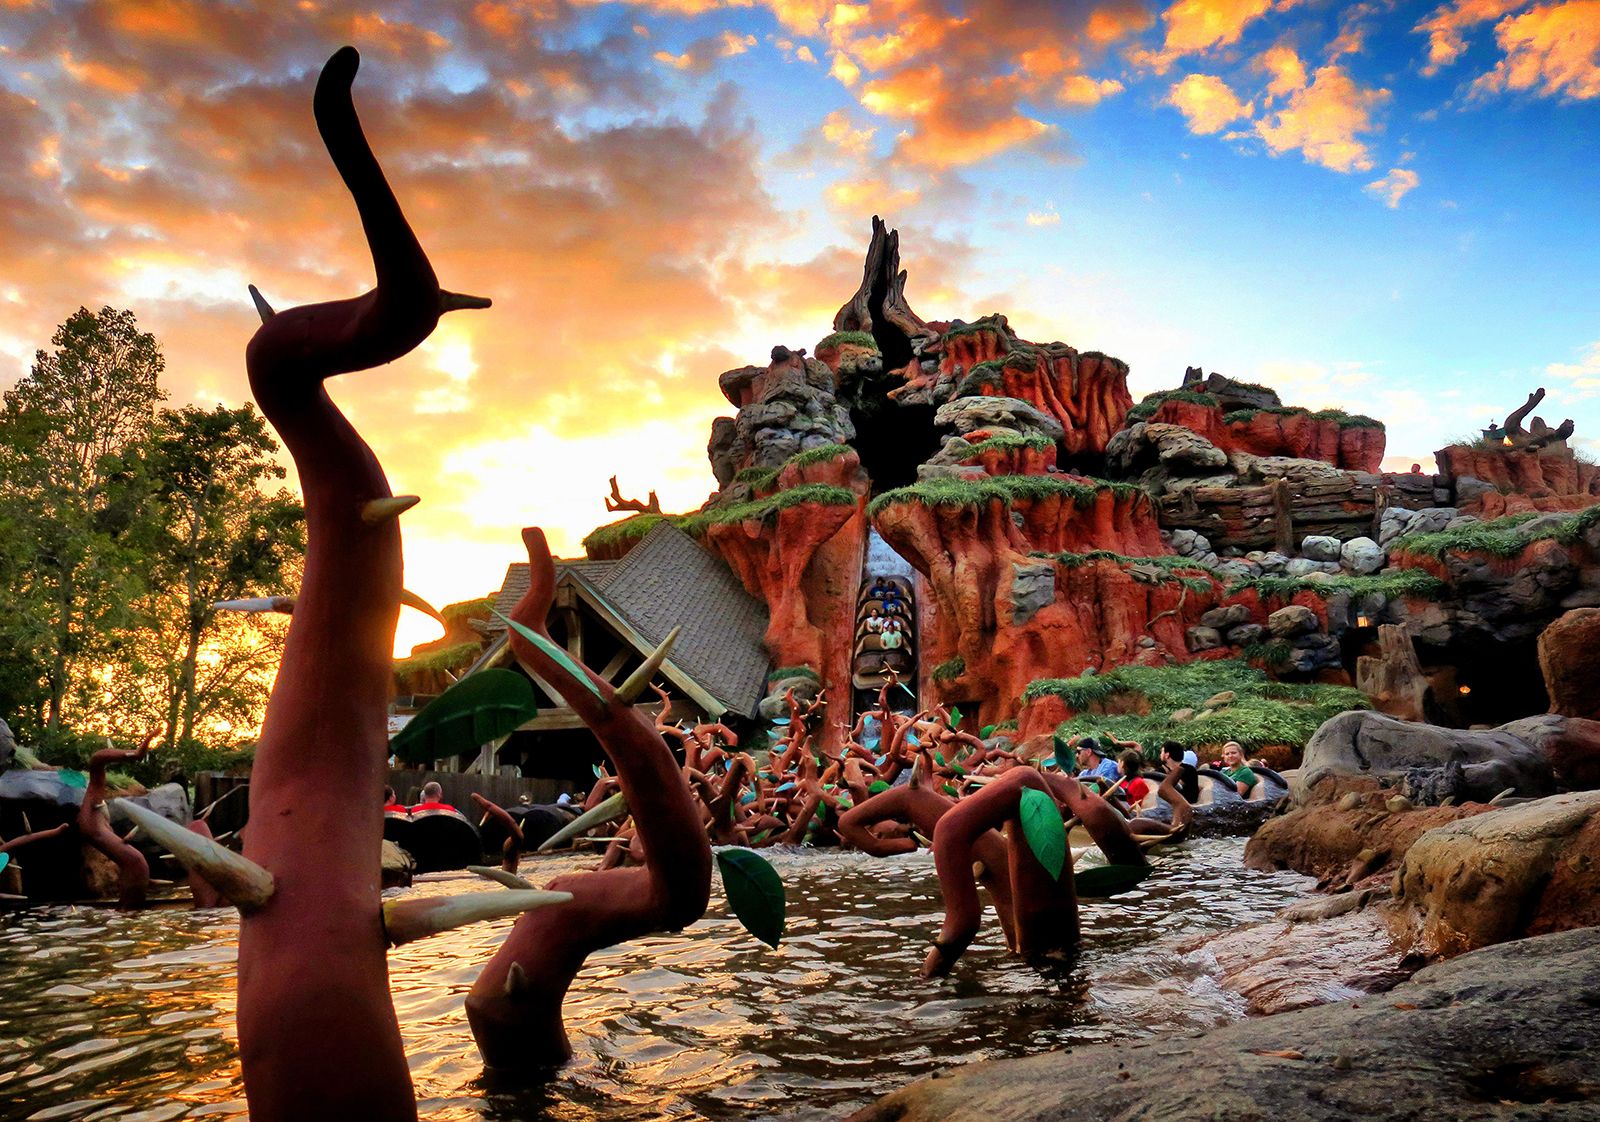 Photo shows the external view of Splash Mountain. The briar patch in the water is in the foreground and the log flume is in the background.